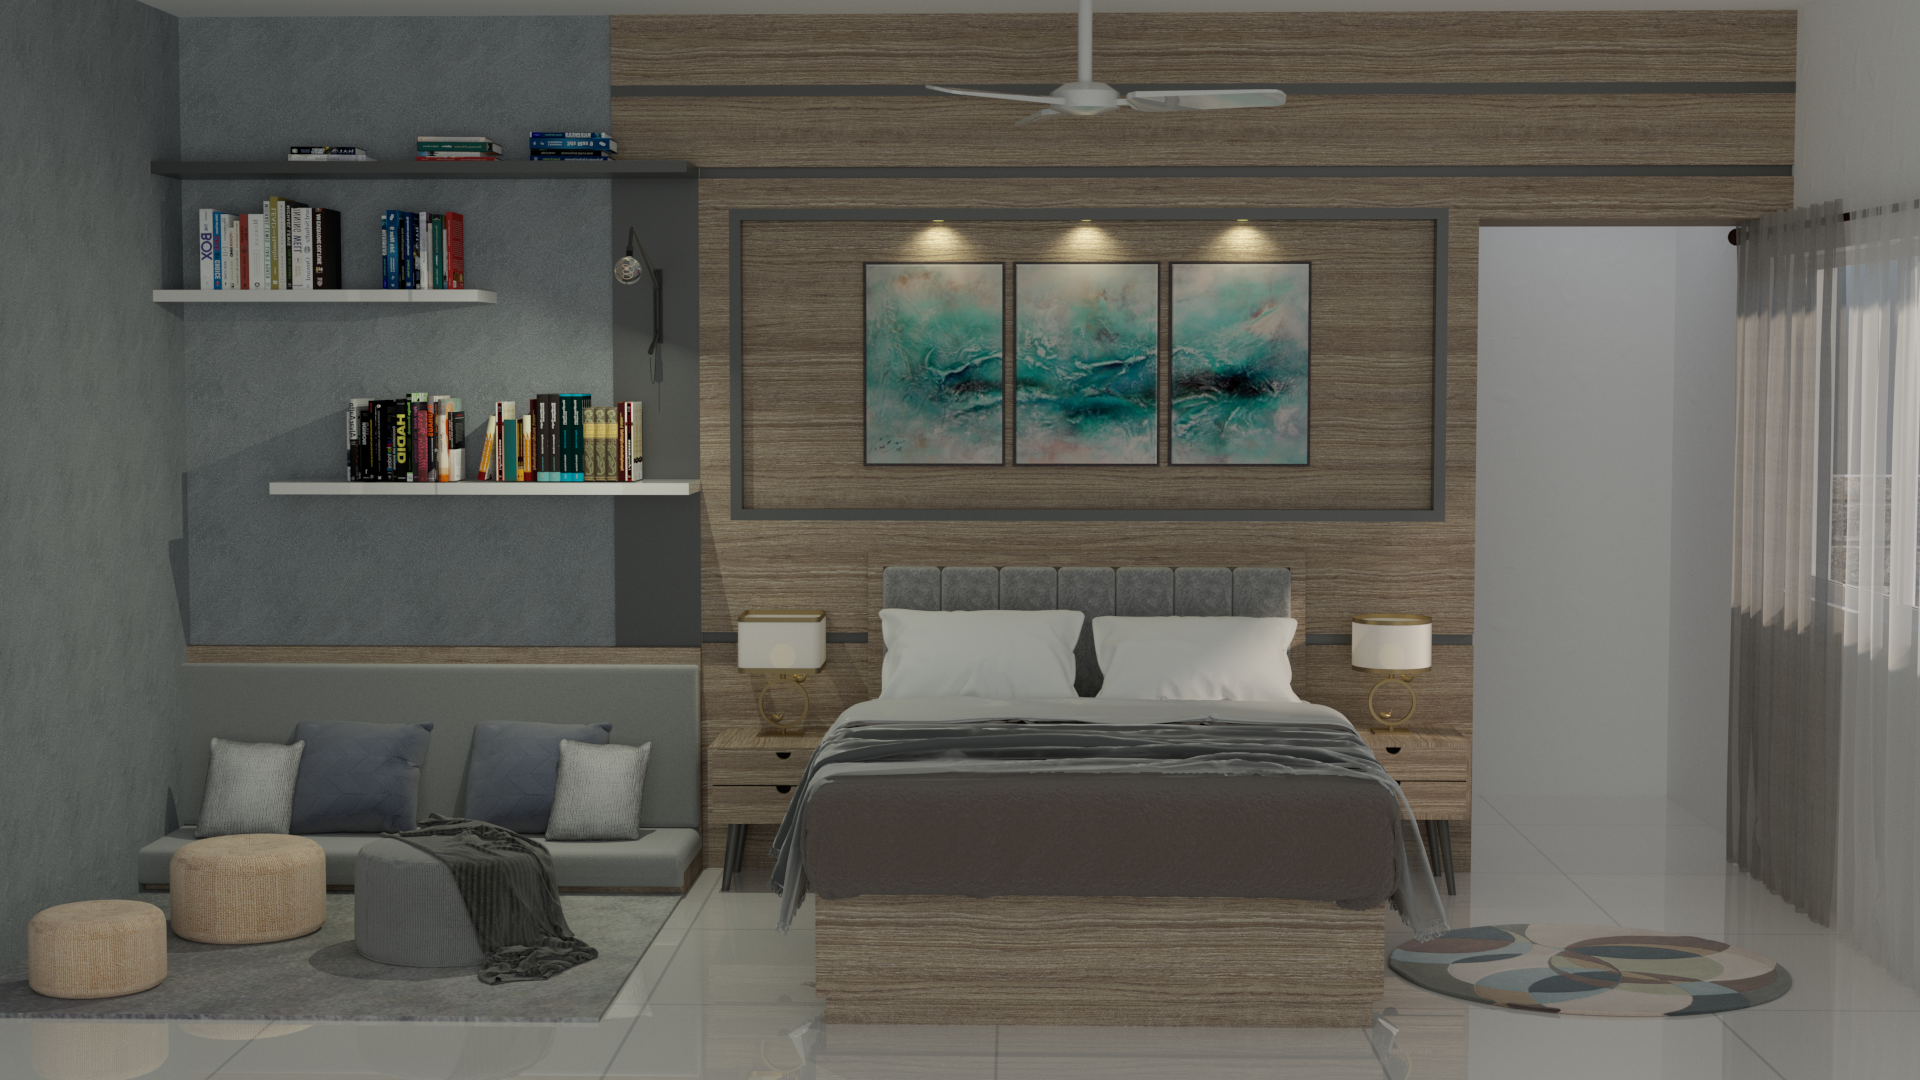 Contemporary Bedroom Design With Bookshelves 